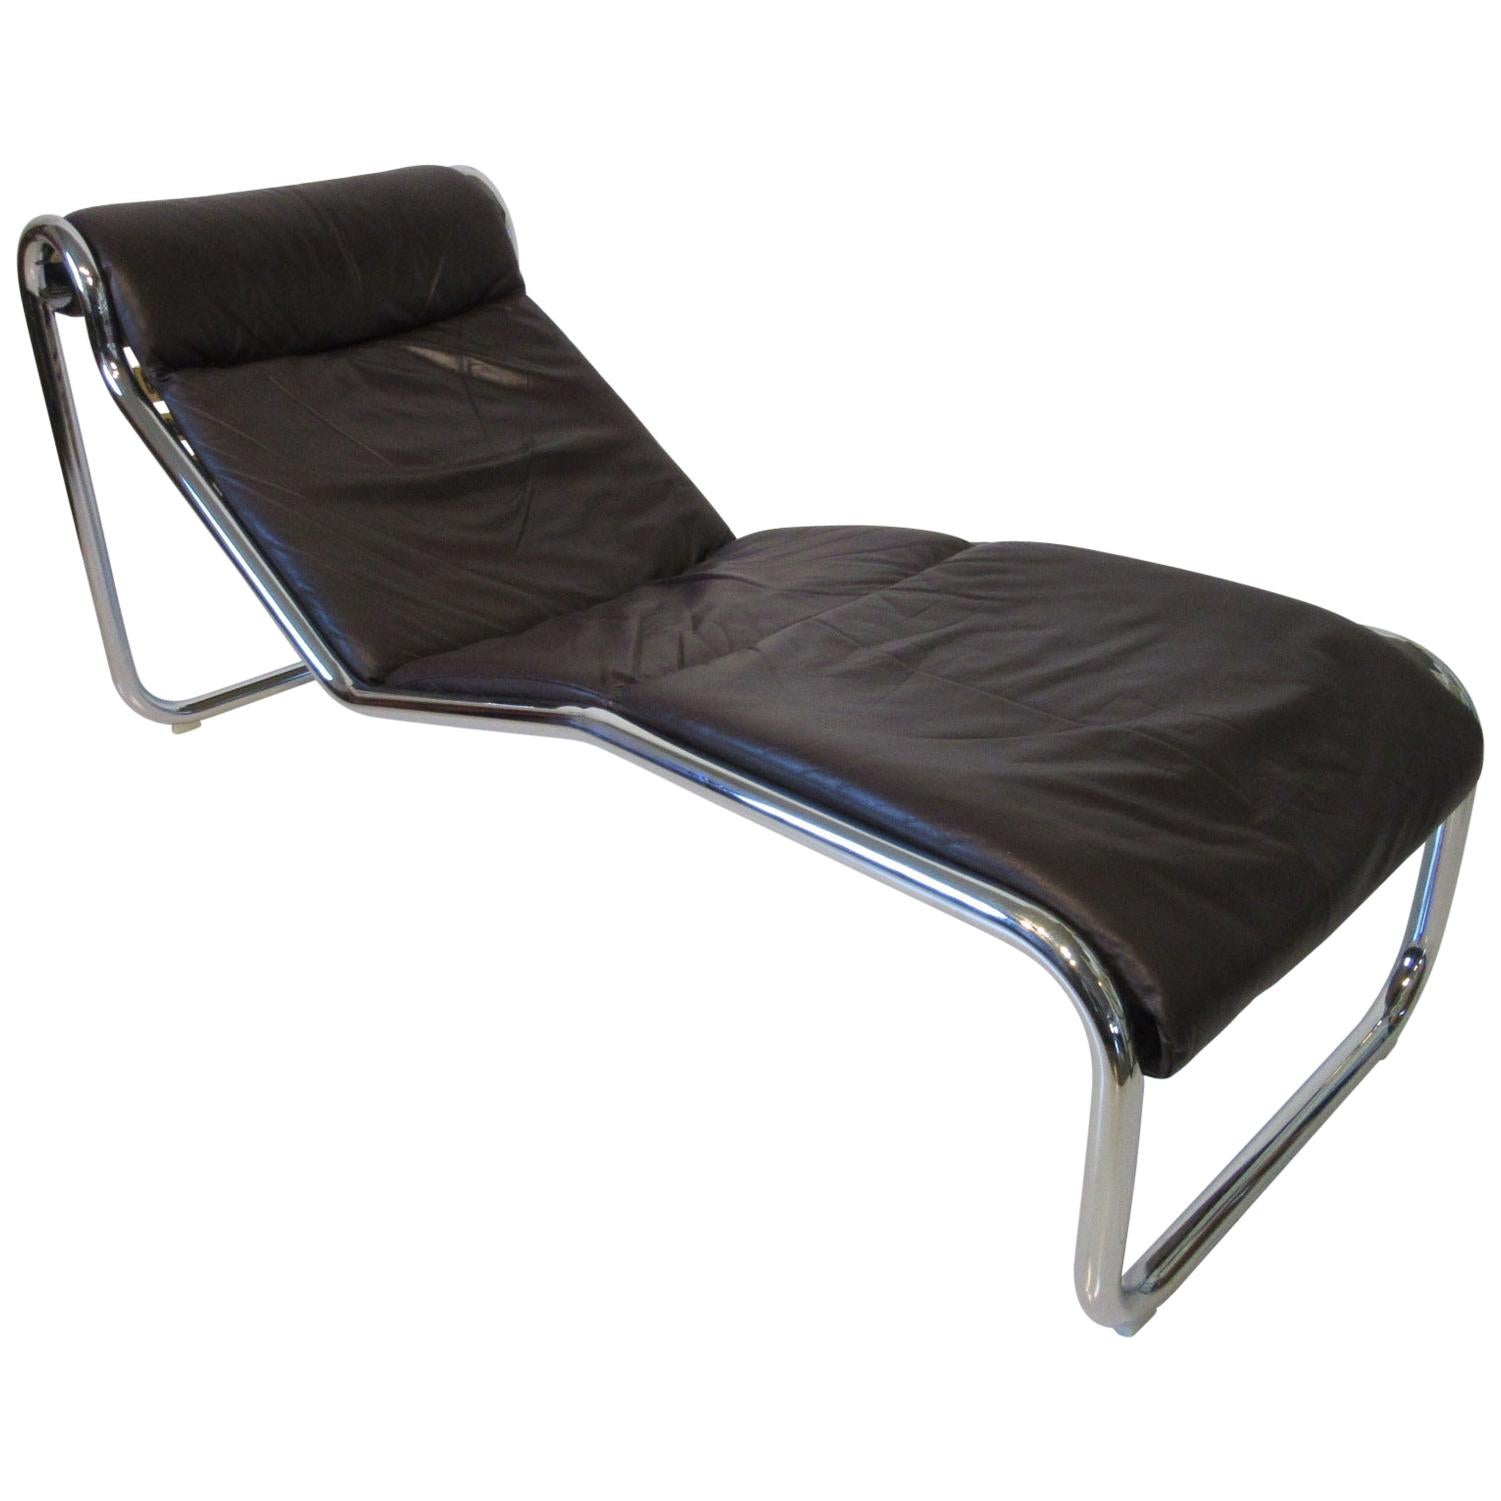 Italian Leather / Chrome Chaise Lounger, Daybed